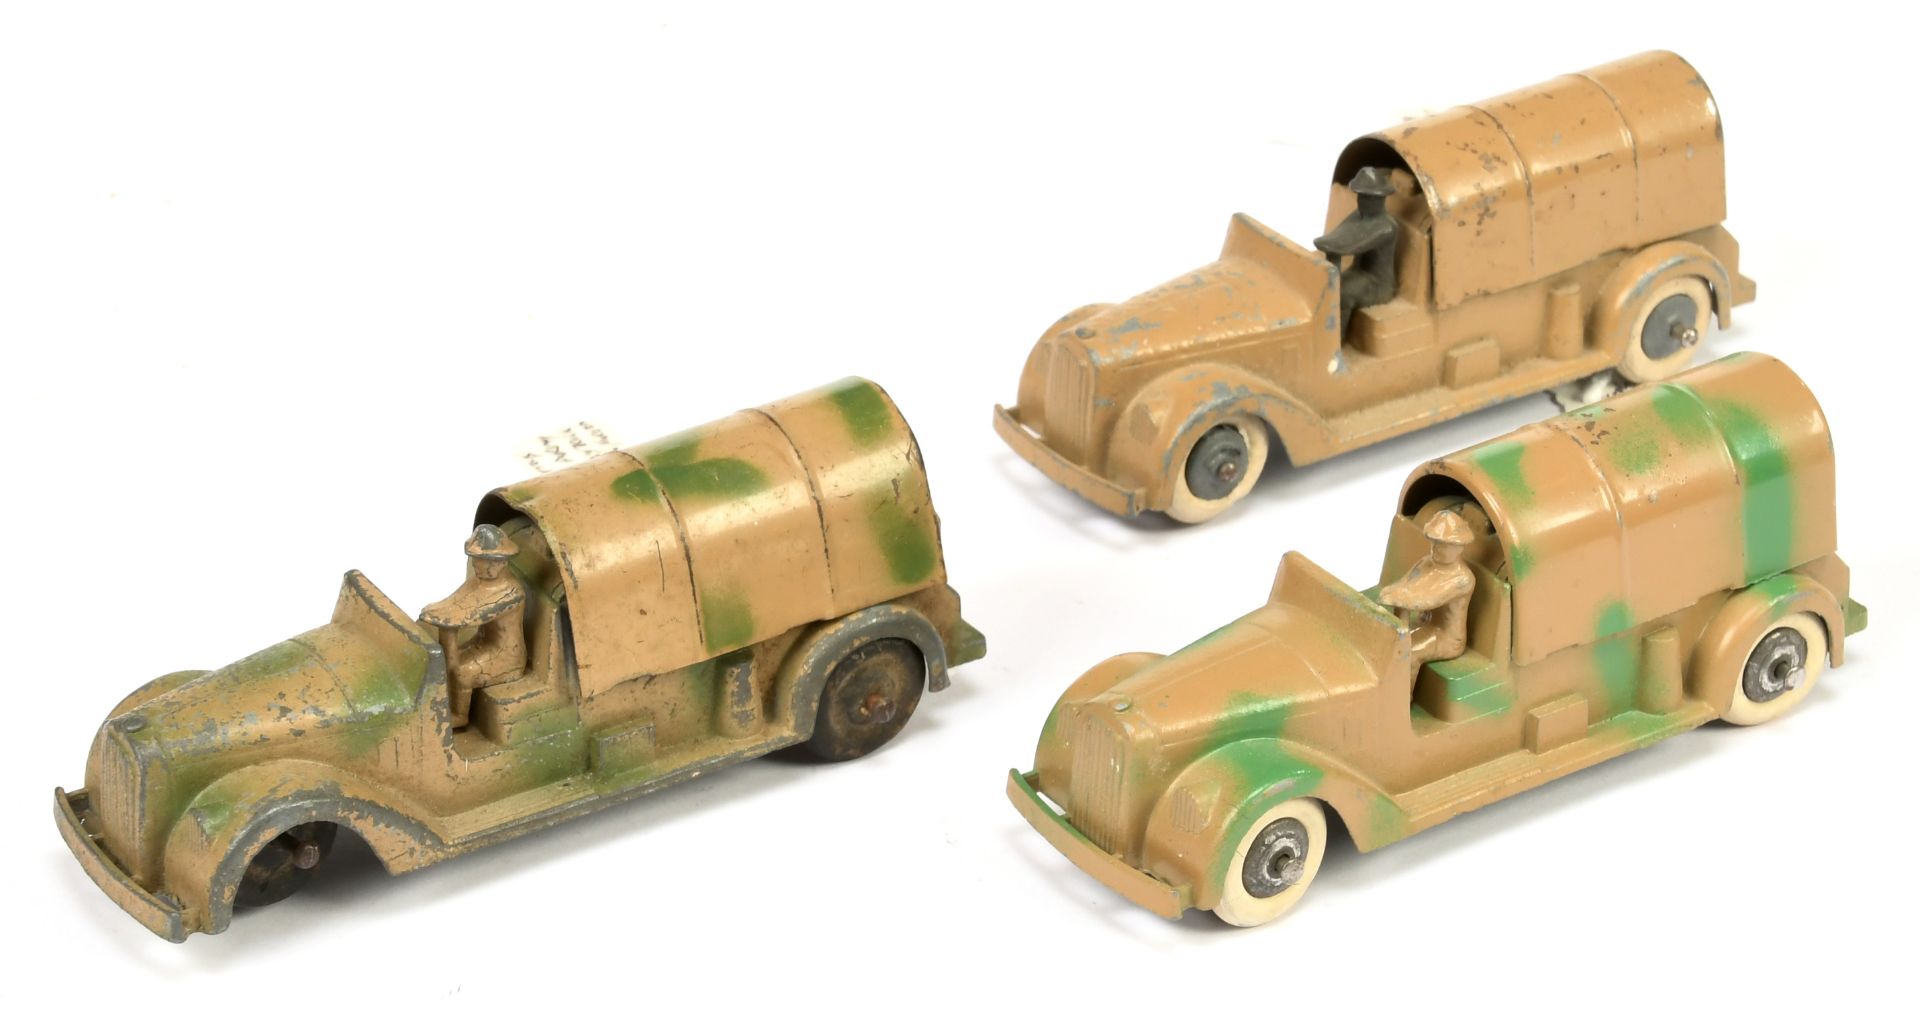 Tootsietoy group of 3 supply trucks  - (1) Camouflage green/tan, chrome hubs with white tyres